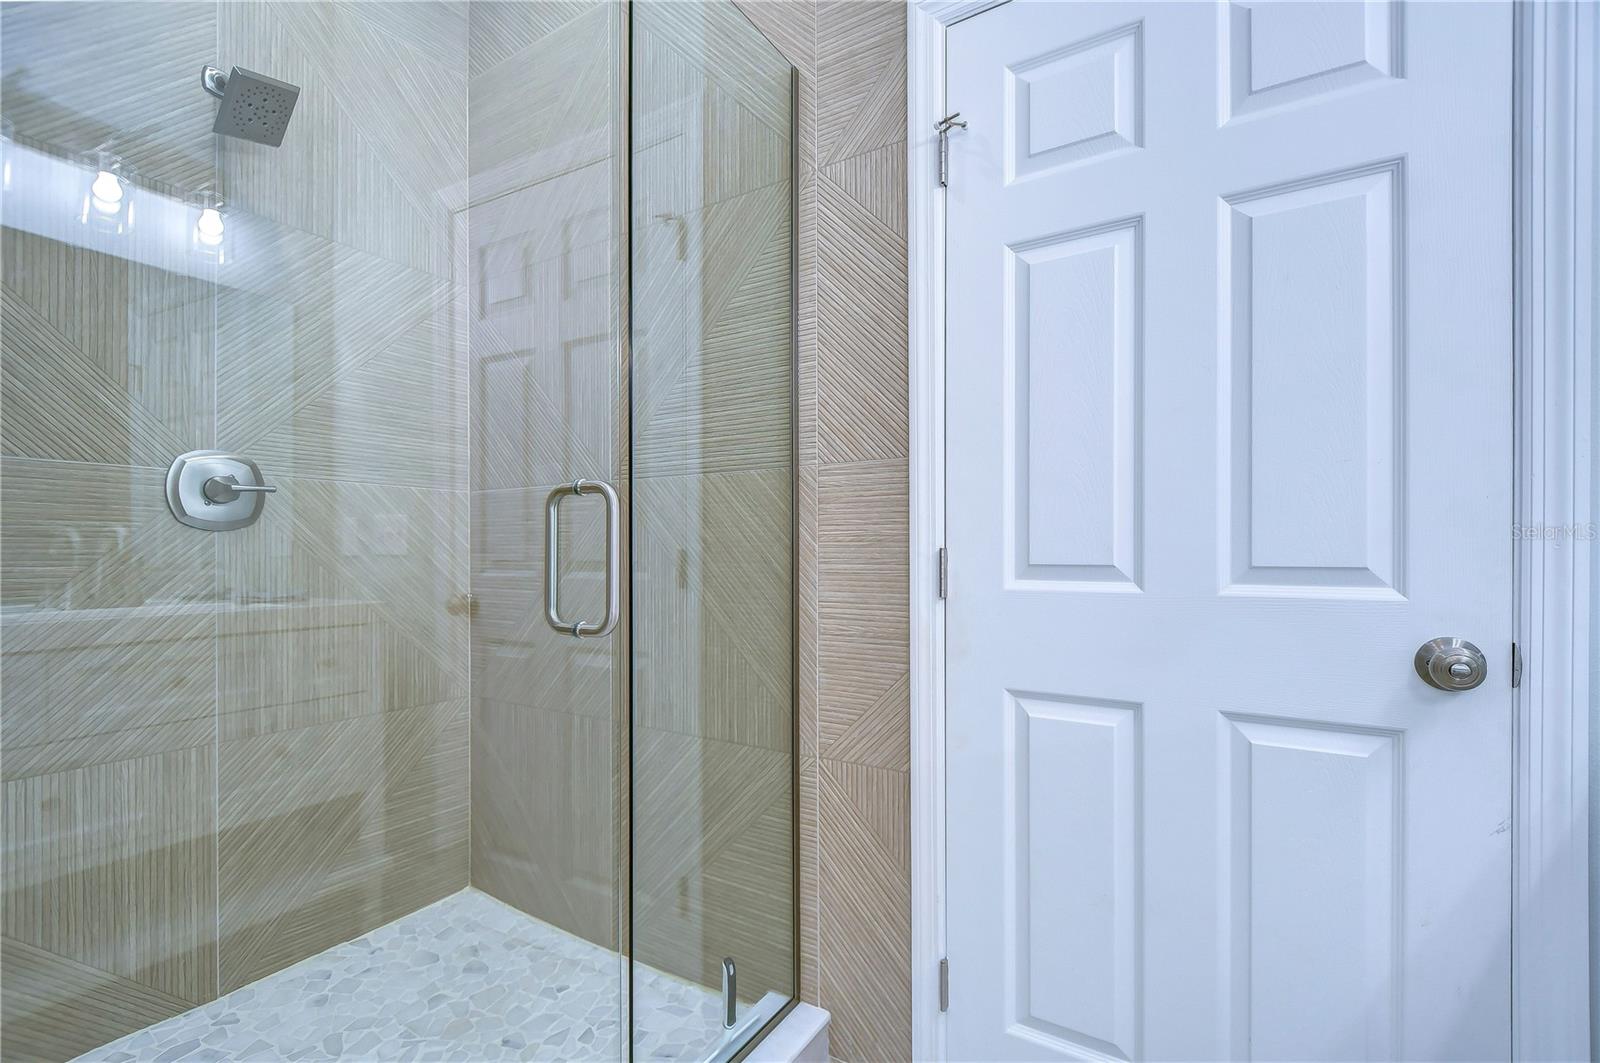 The beautiful tile in the large shower adds so much interest to the master bathroom.